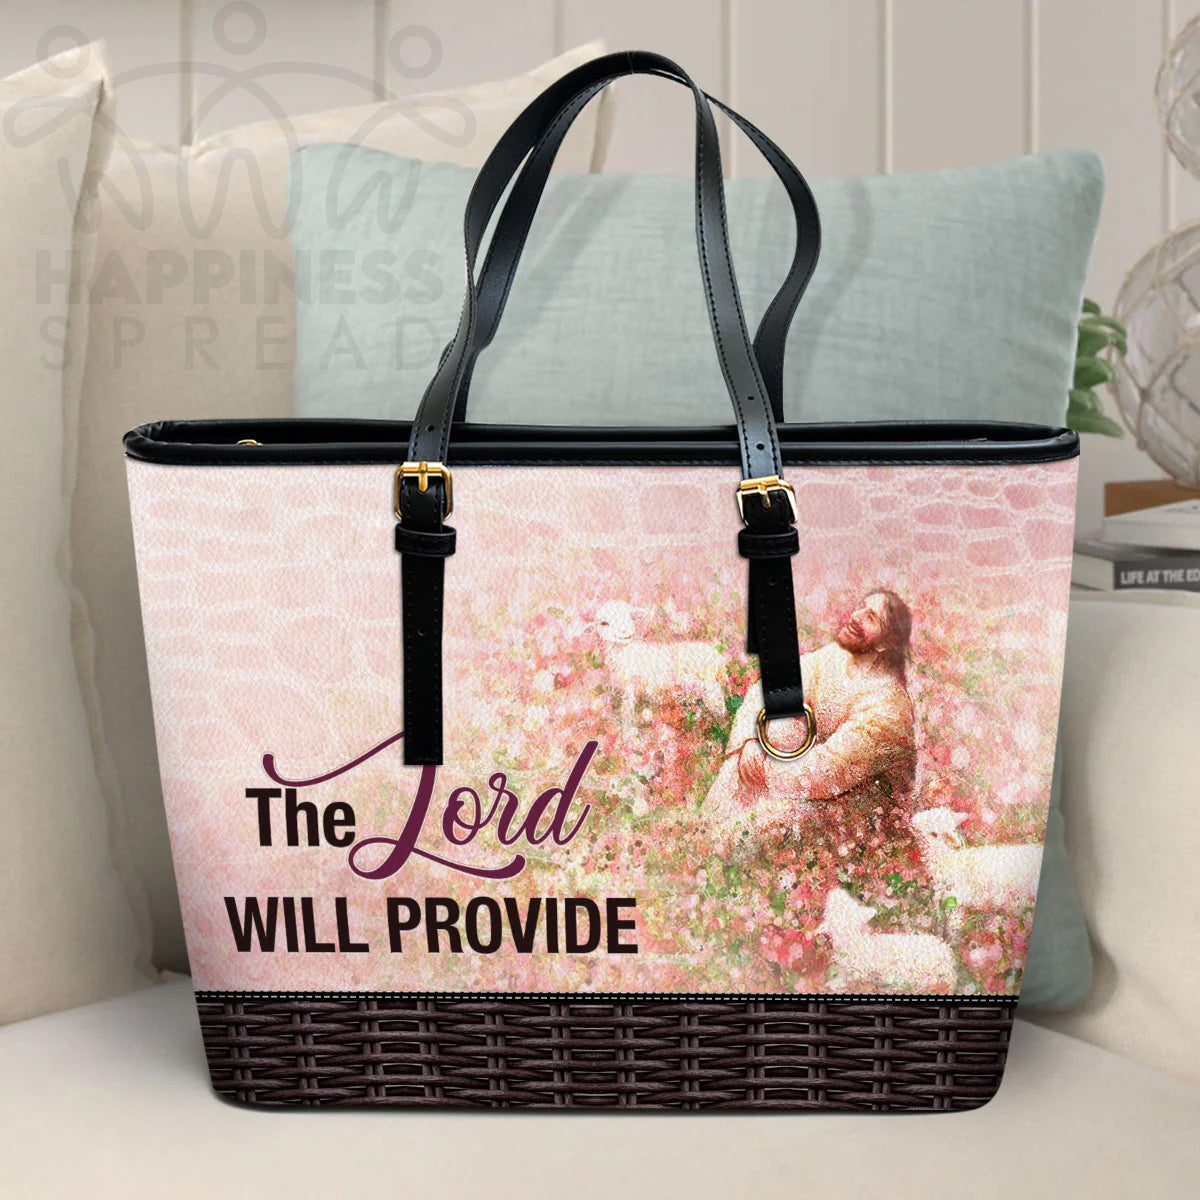 Christianart Handbag, Personalized Hand Bag, The Lord Will Provide, Personalized Gifts, Gifts for Women. - Christian Art Bag